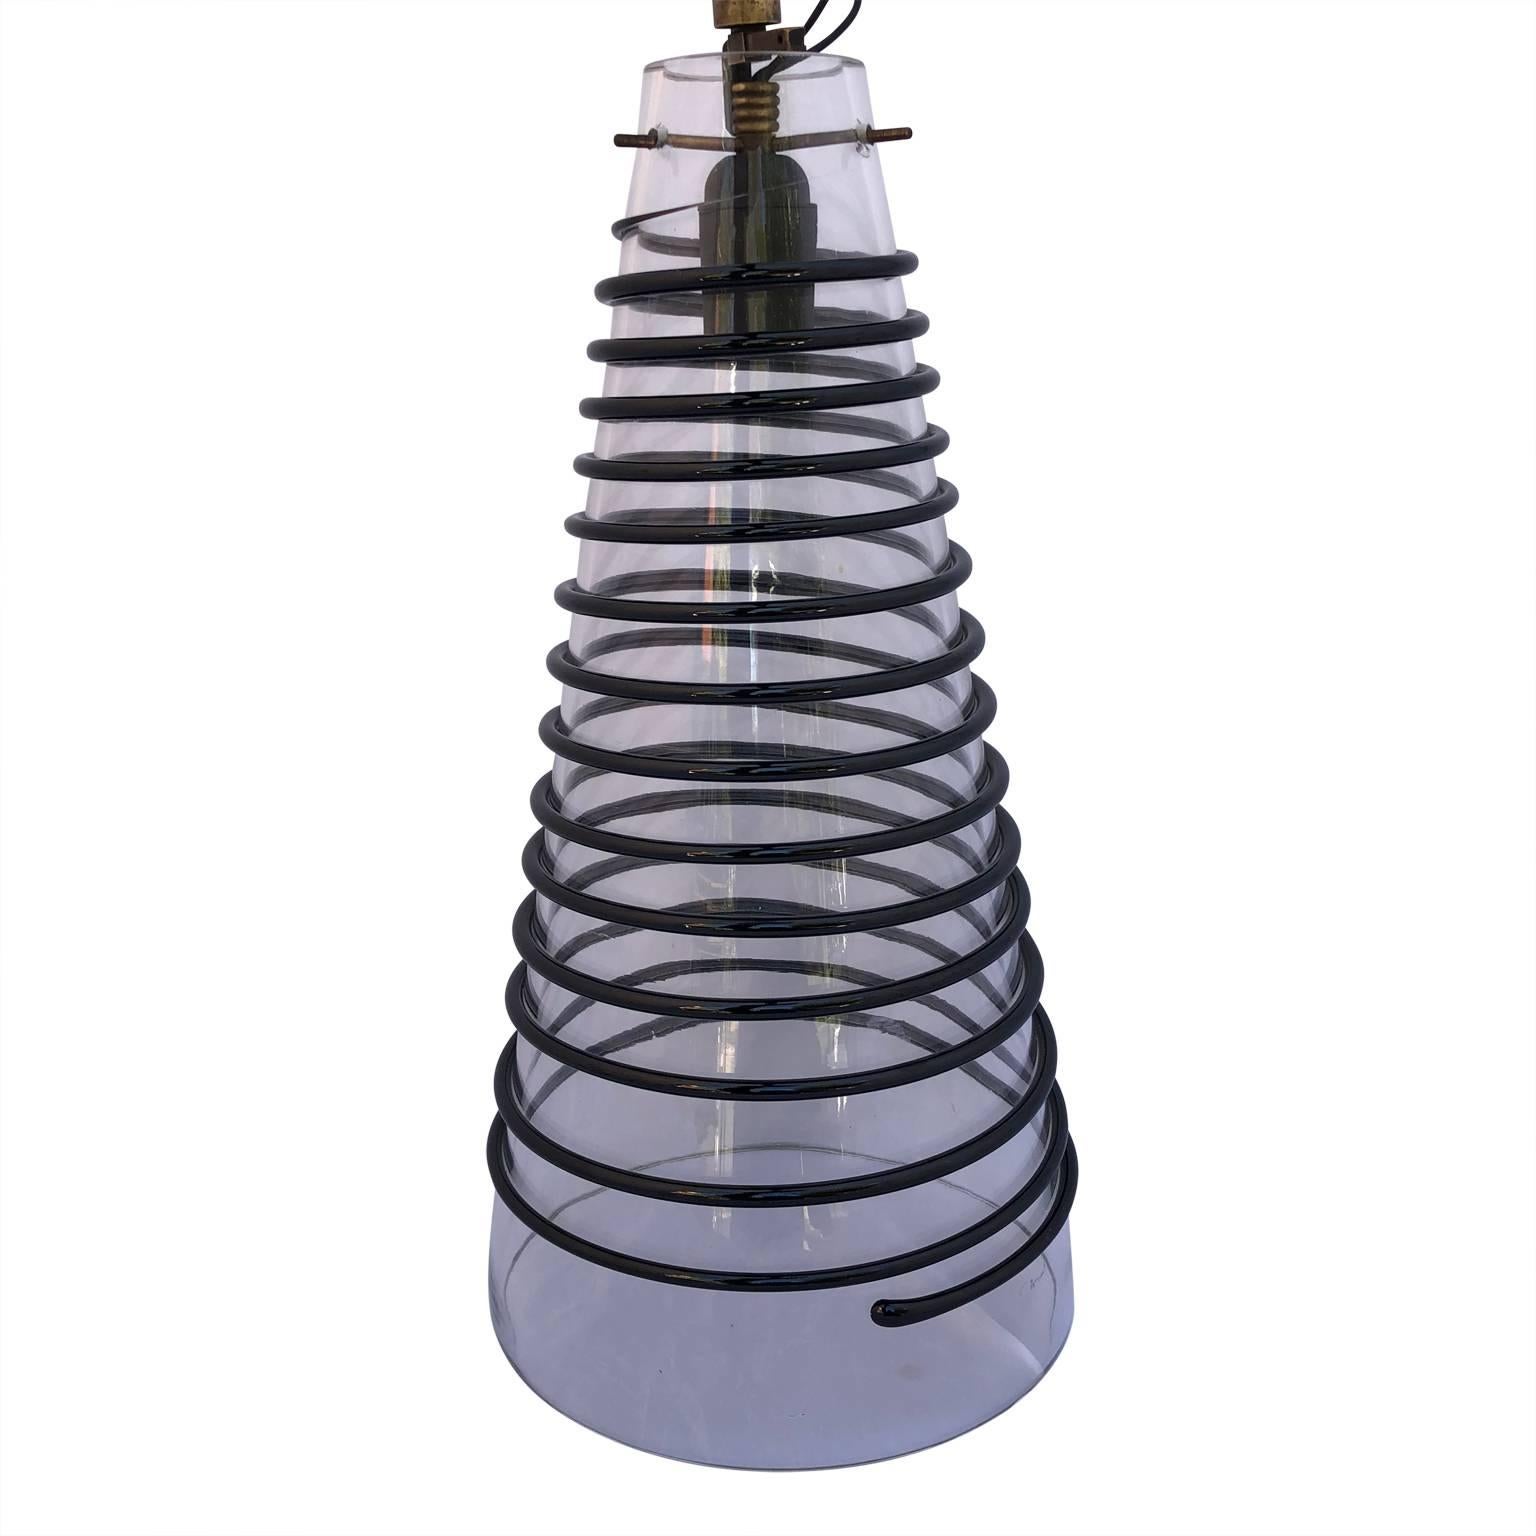 Vintage Italian cone-shaped glass pendant

UL rewiring, canopy and chain of choice will be applied after point of purchase at no extra charge.